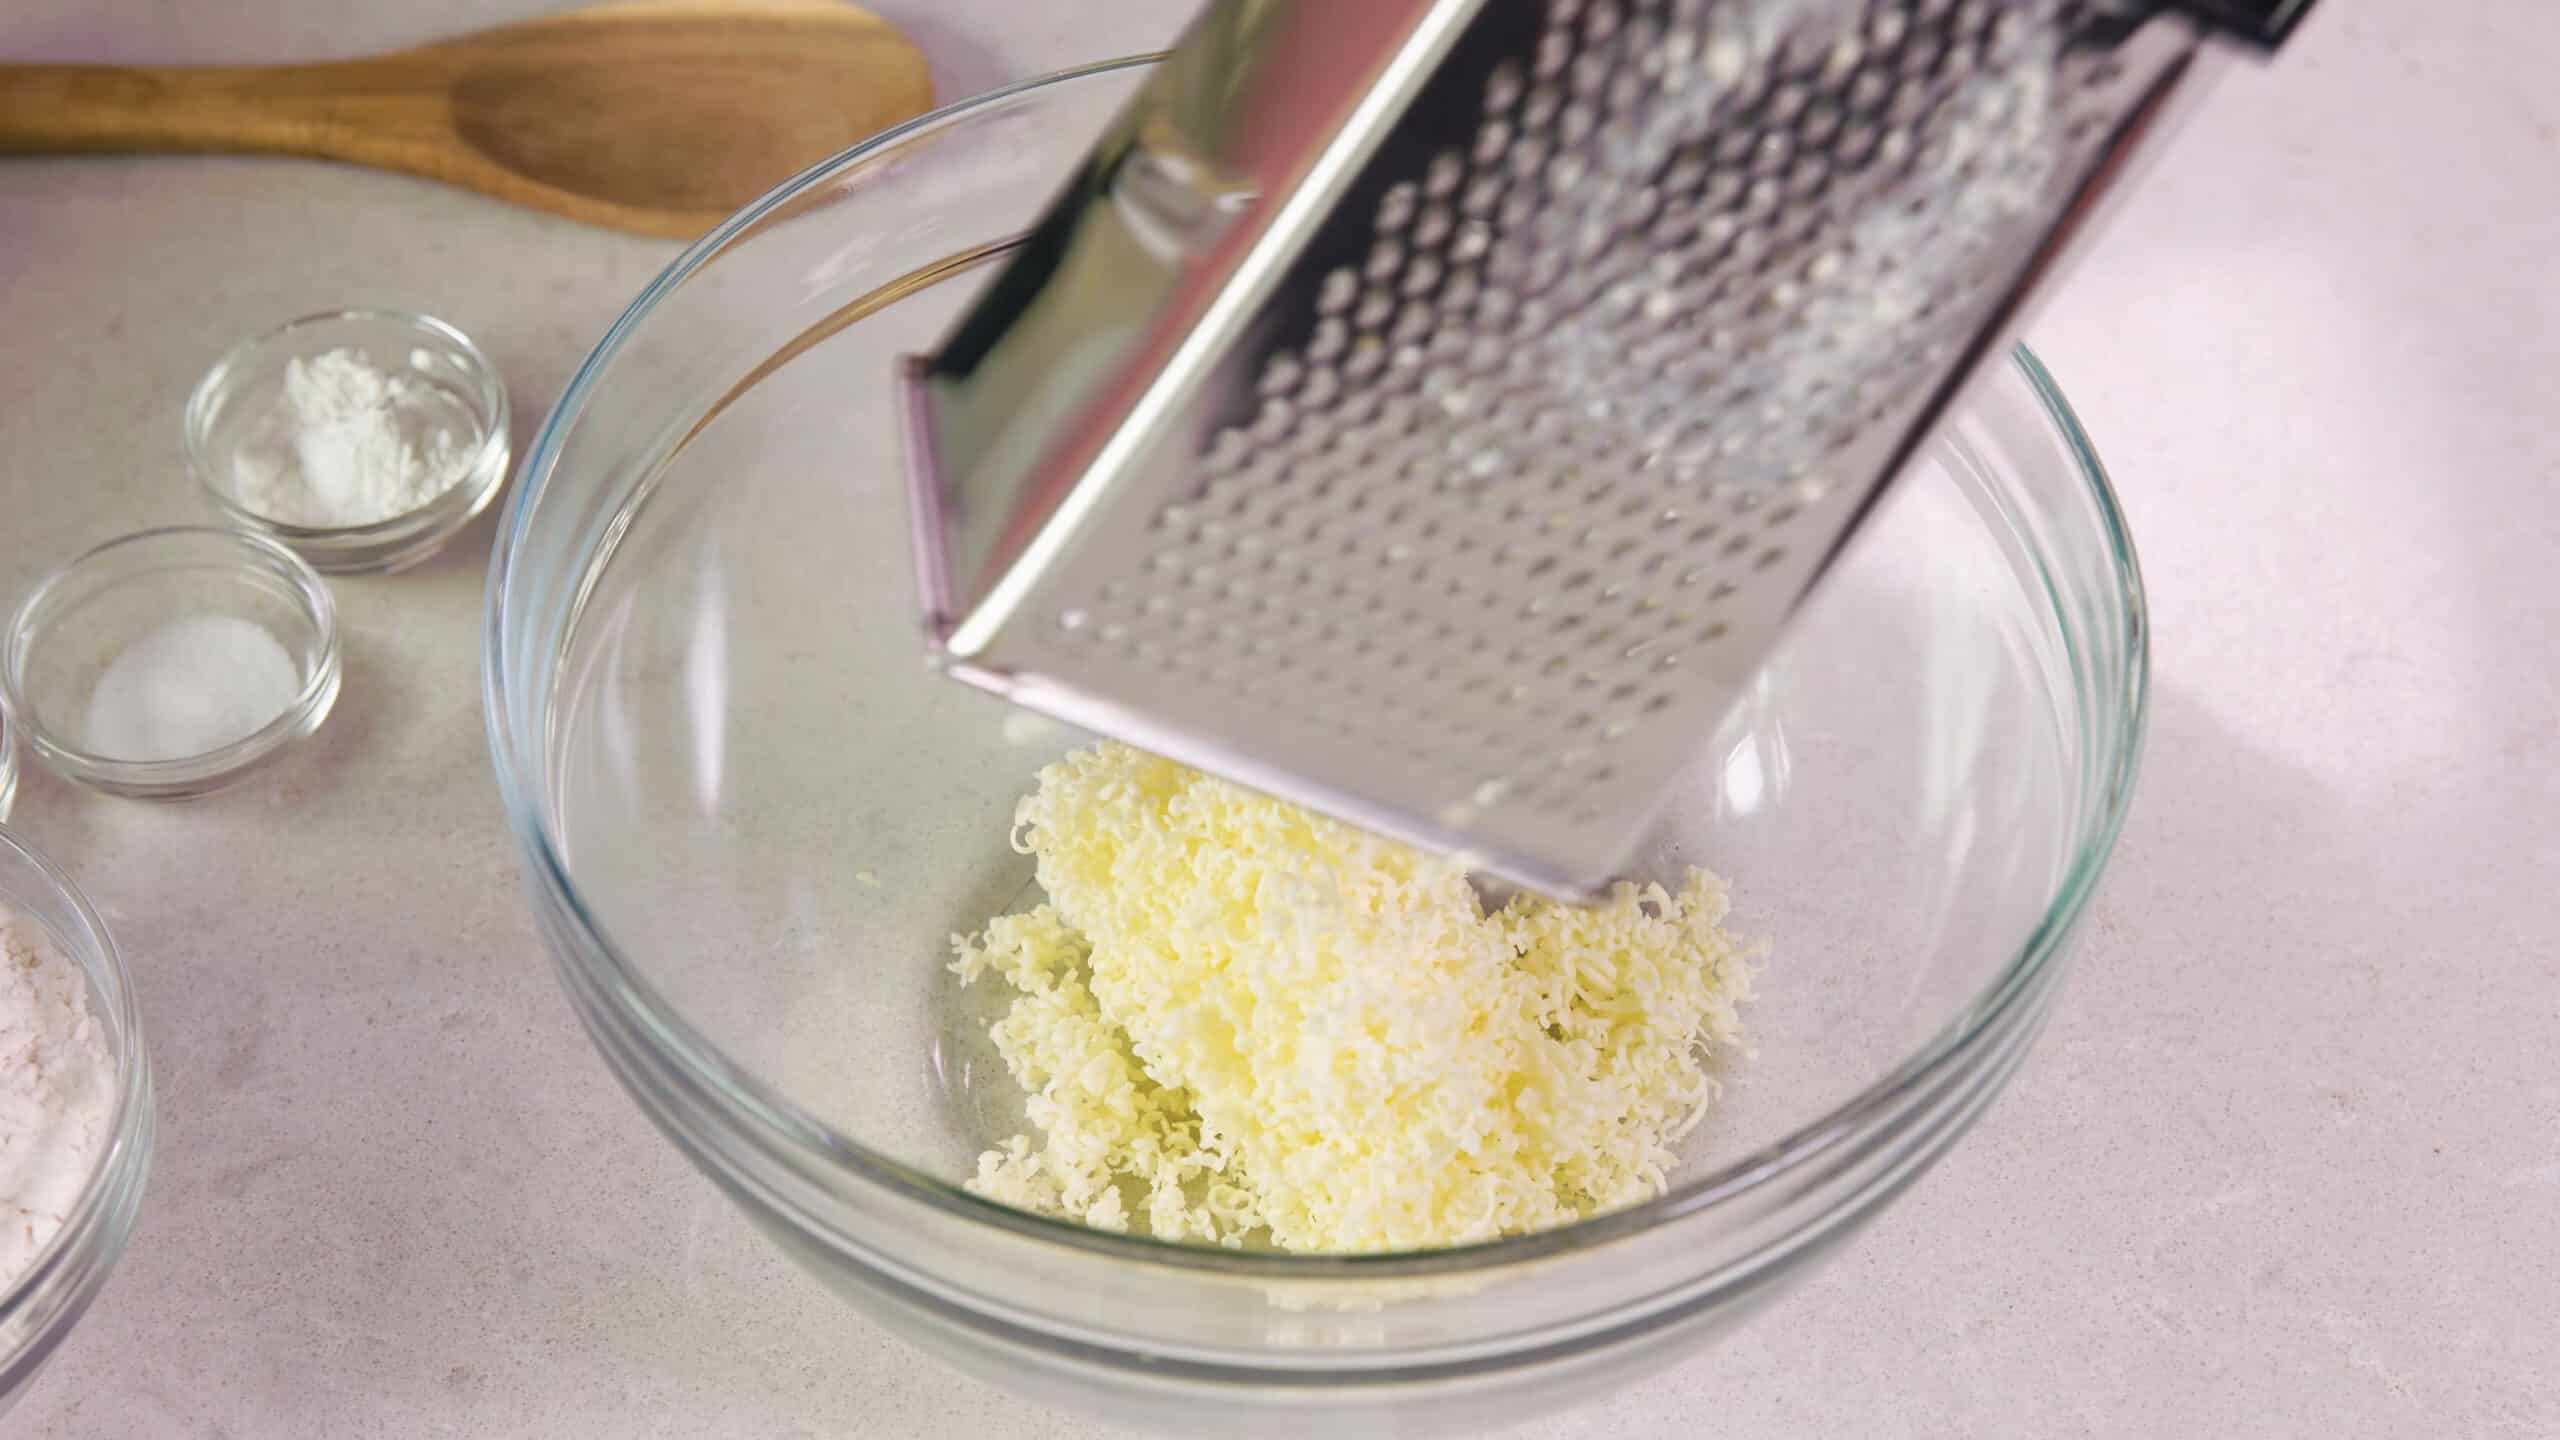 Using the fine side of a cheese shredder, shred required stick of cold butter into a mixing bowl to create fine sized shreds of butter to integrate into the biscuits.